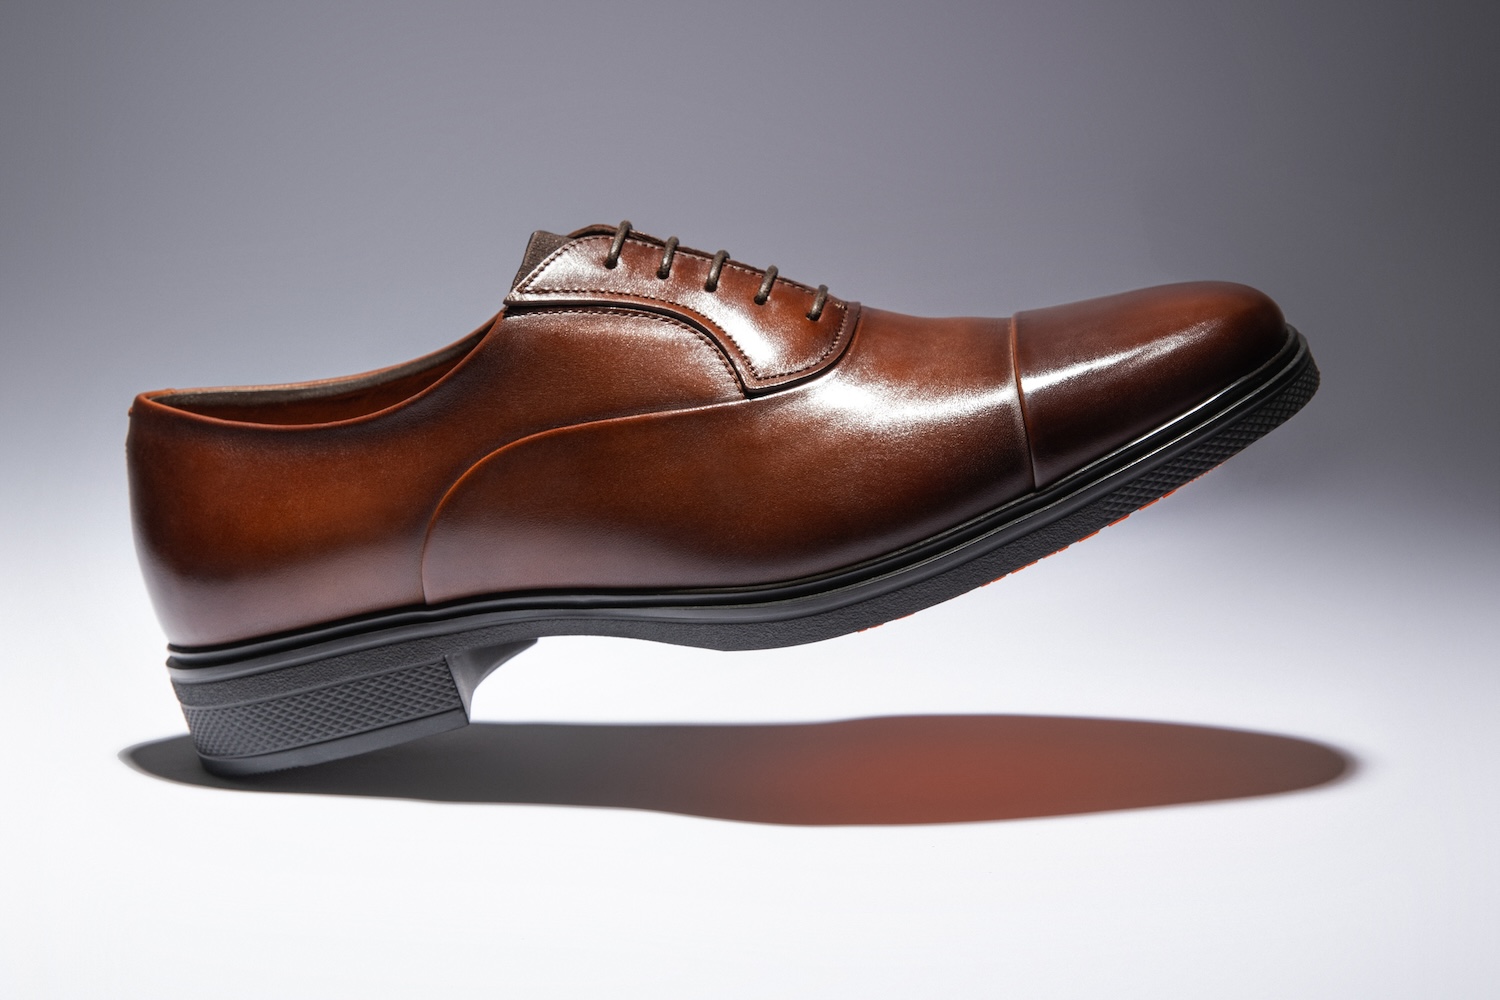 Promotional image of a brown leather shoe from Santoni's Easy collection. 